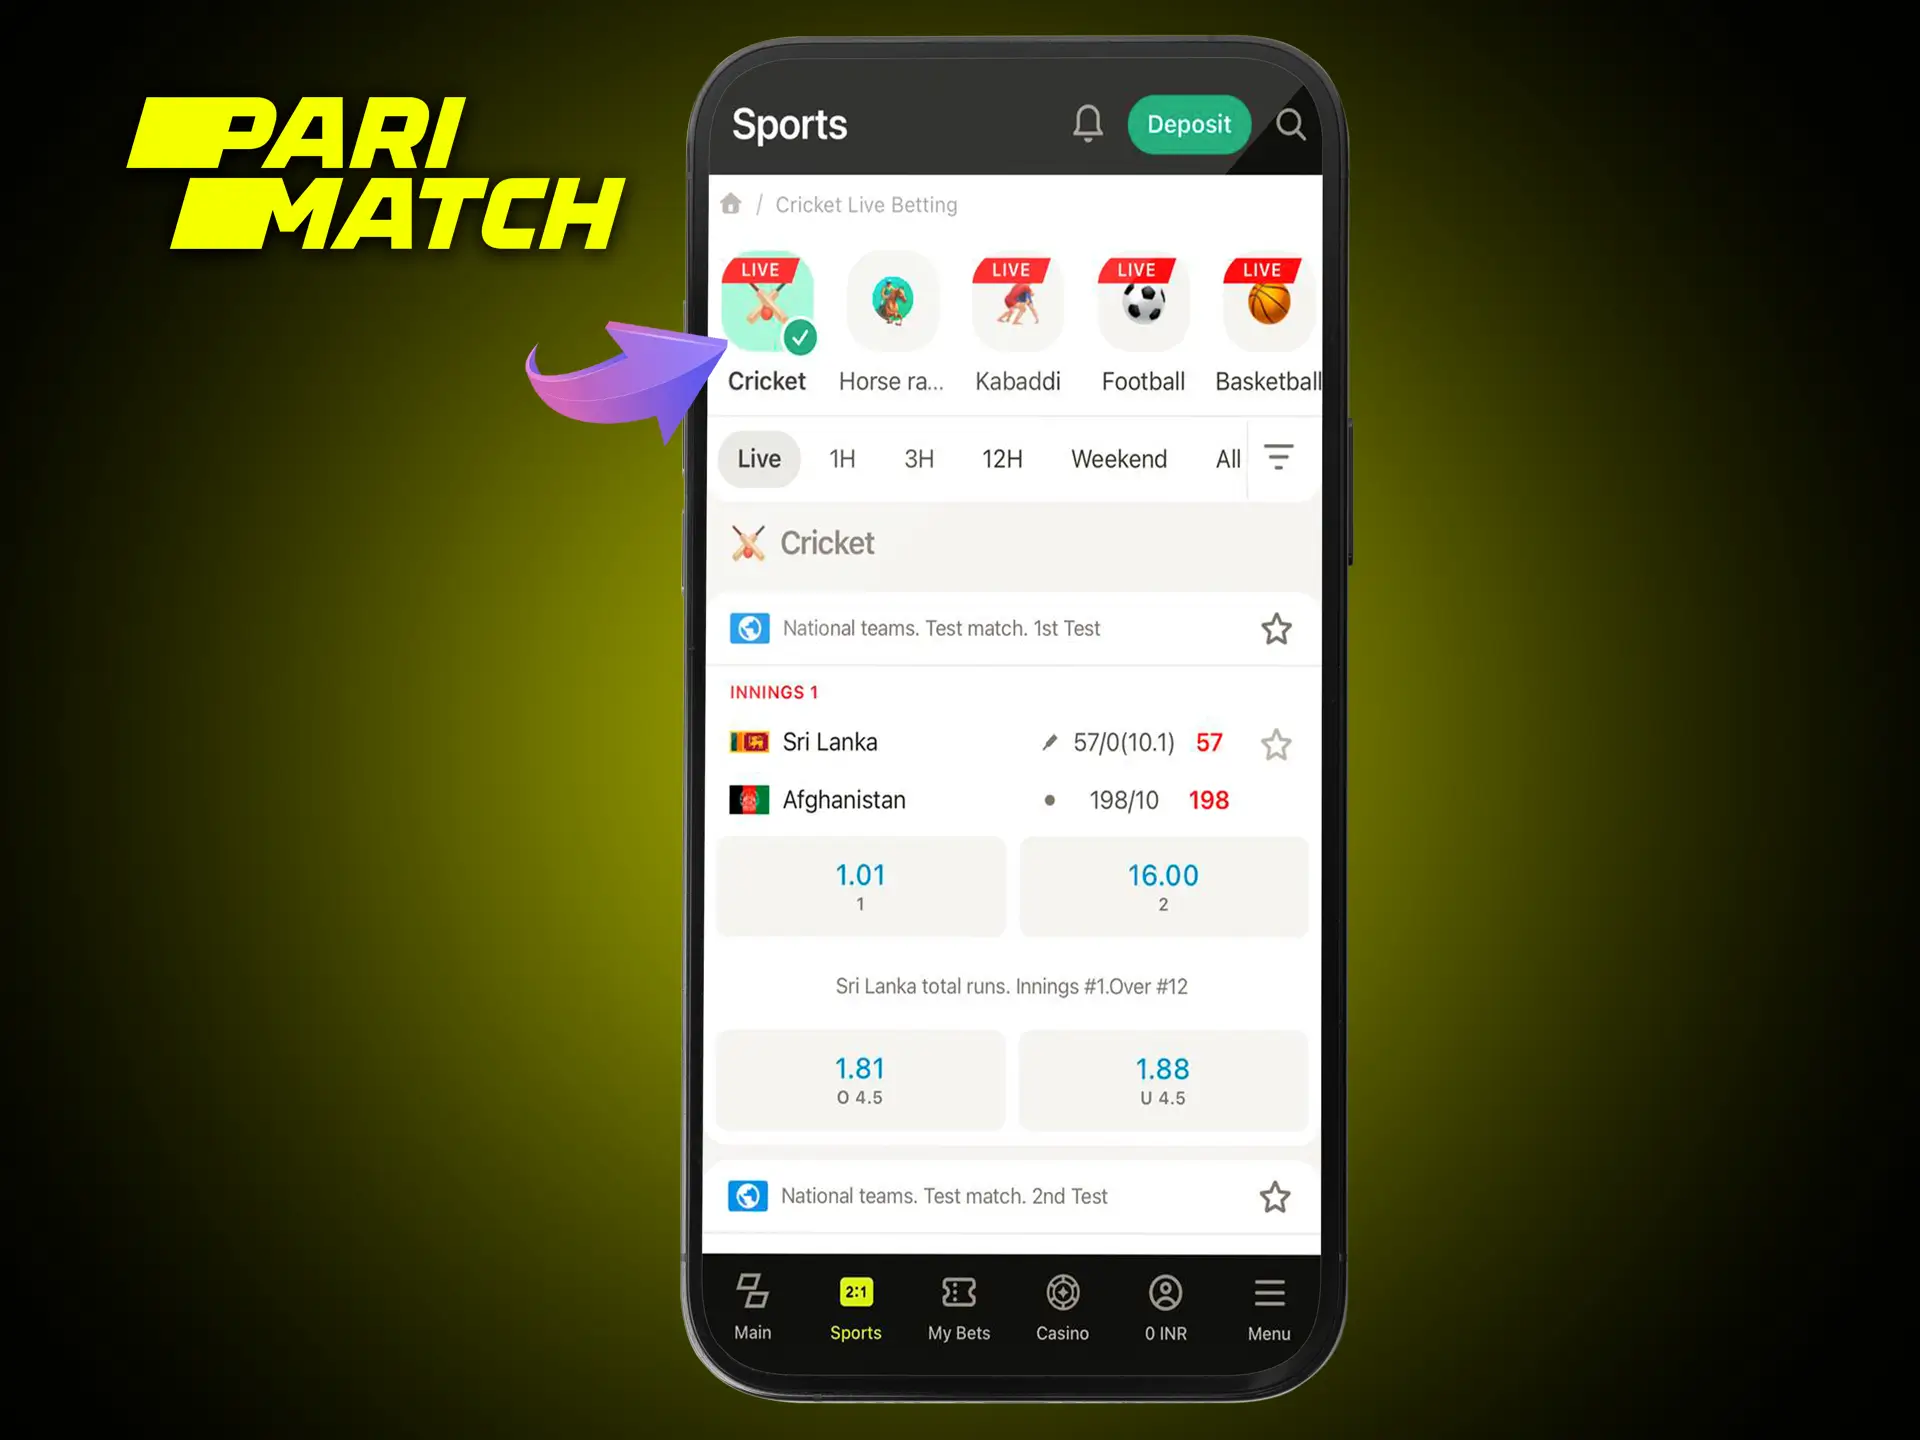 Decide which discipline you want to bet on at PariMatch.